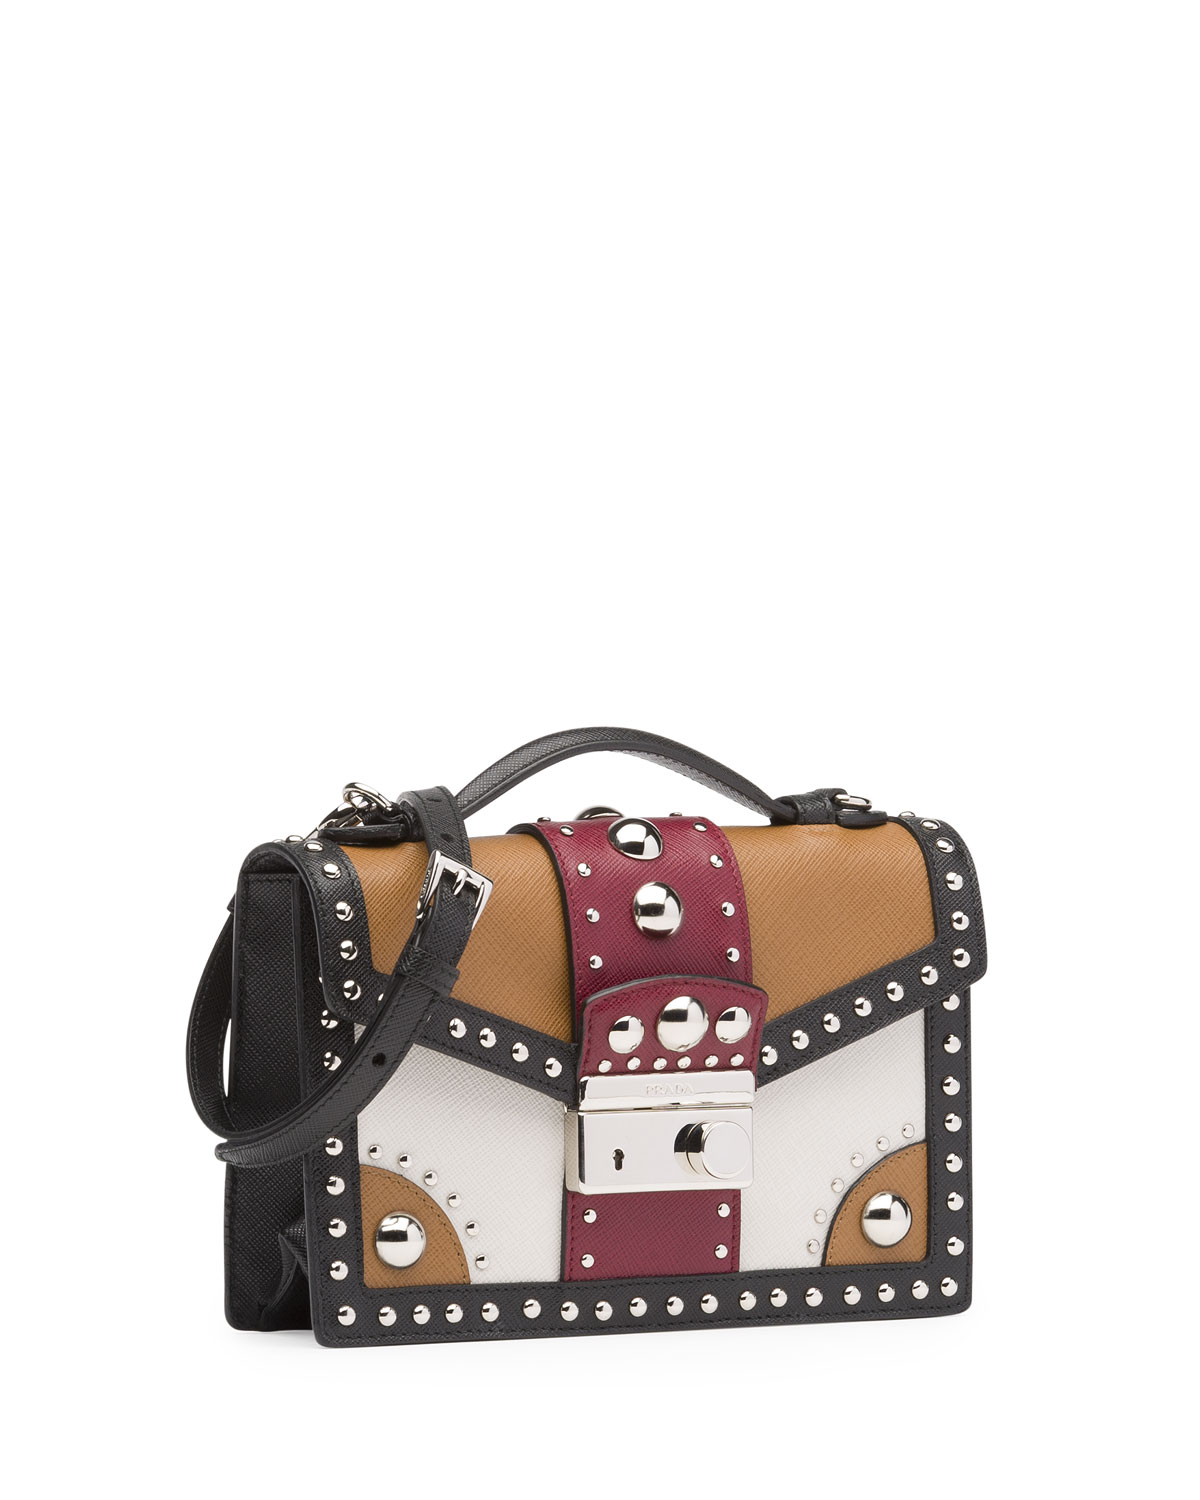 Prada Tricolor Studded Saffiano Sound Bag in Brown (Brown/Red ...